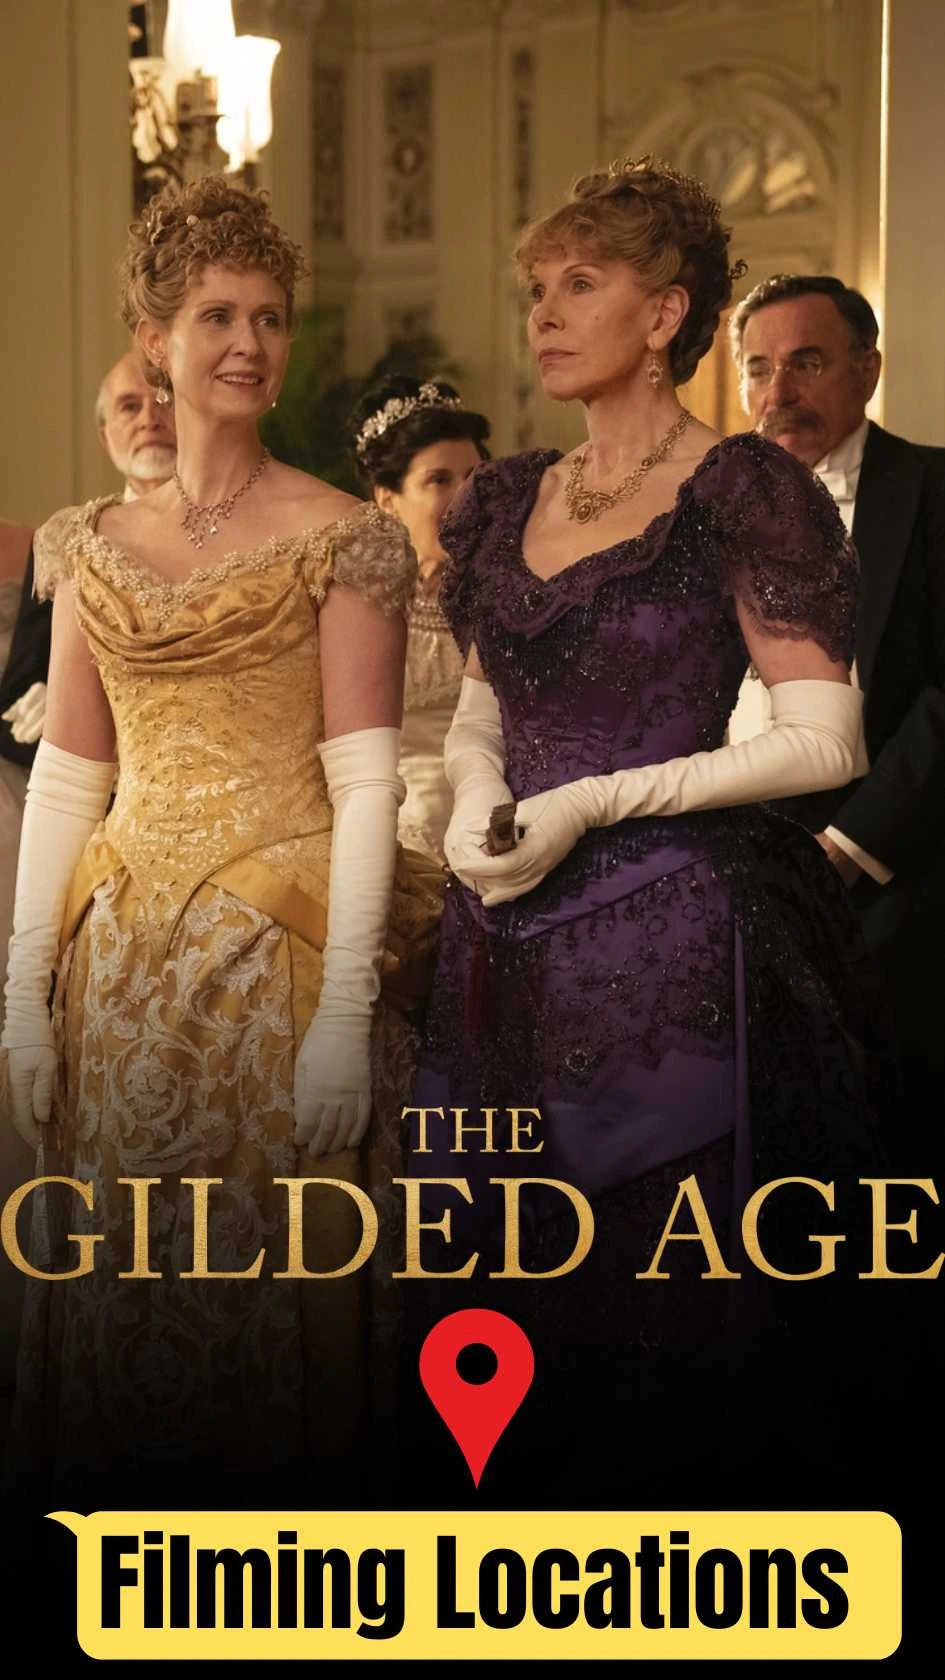 The Gilded Age Filming Locations